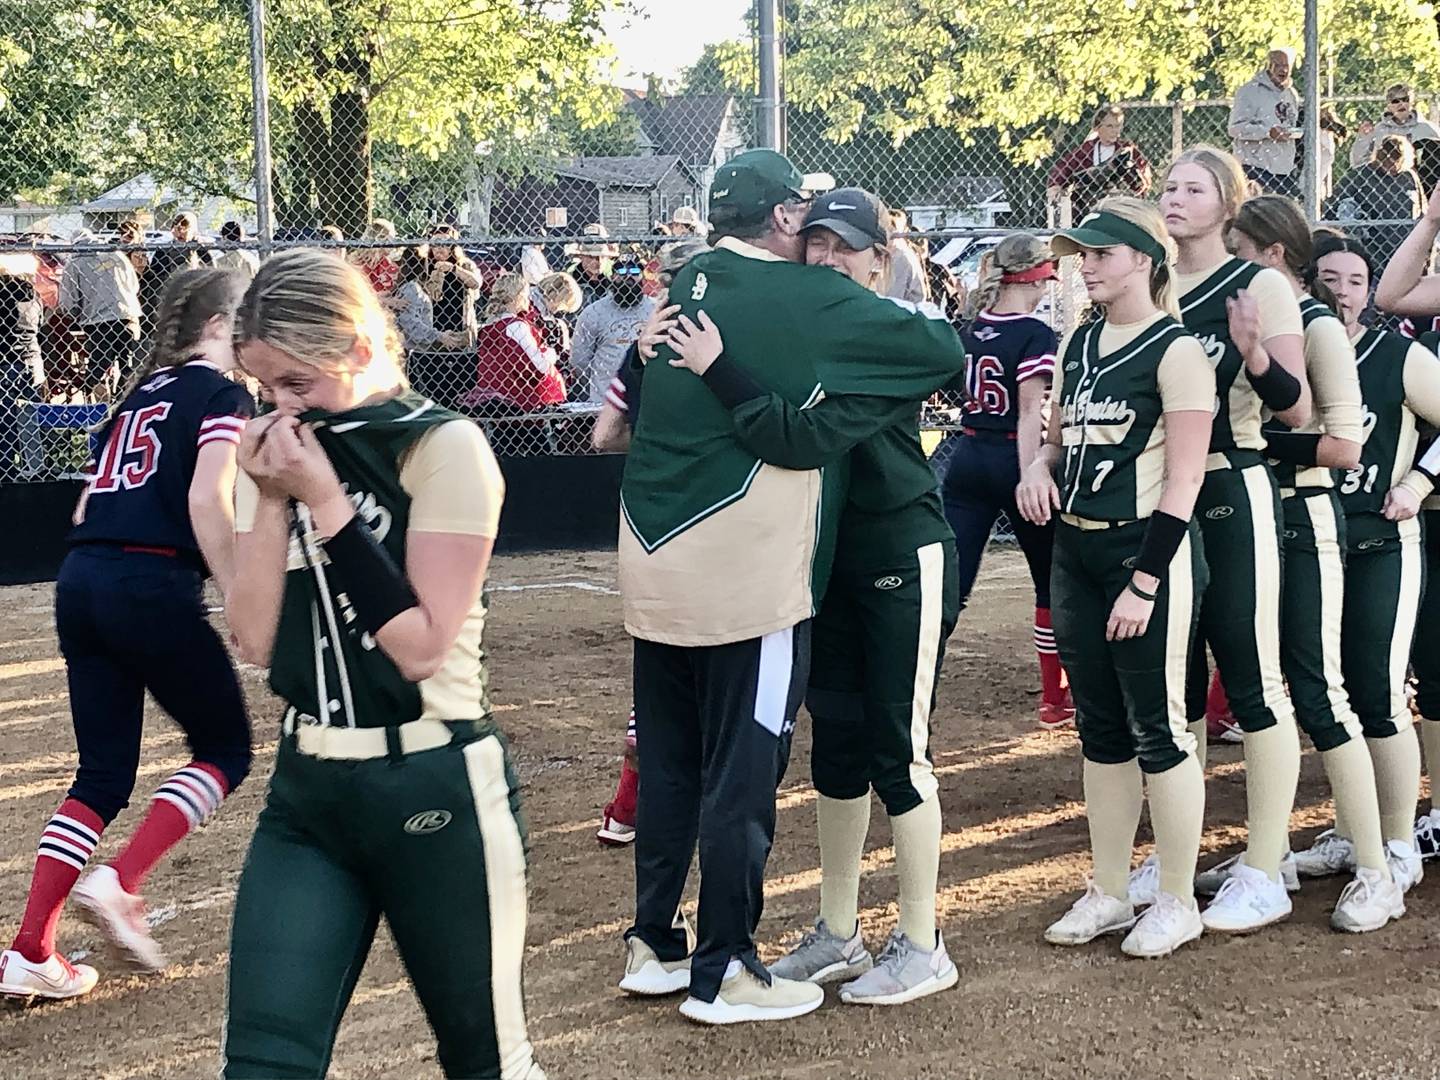 St. Bede coach Shawn Sons lines up to hug his players after Friday's 2-1 loss in the sectional championship.